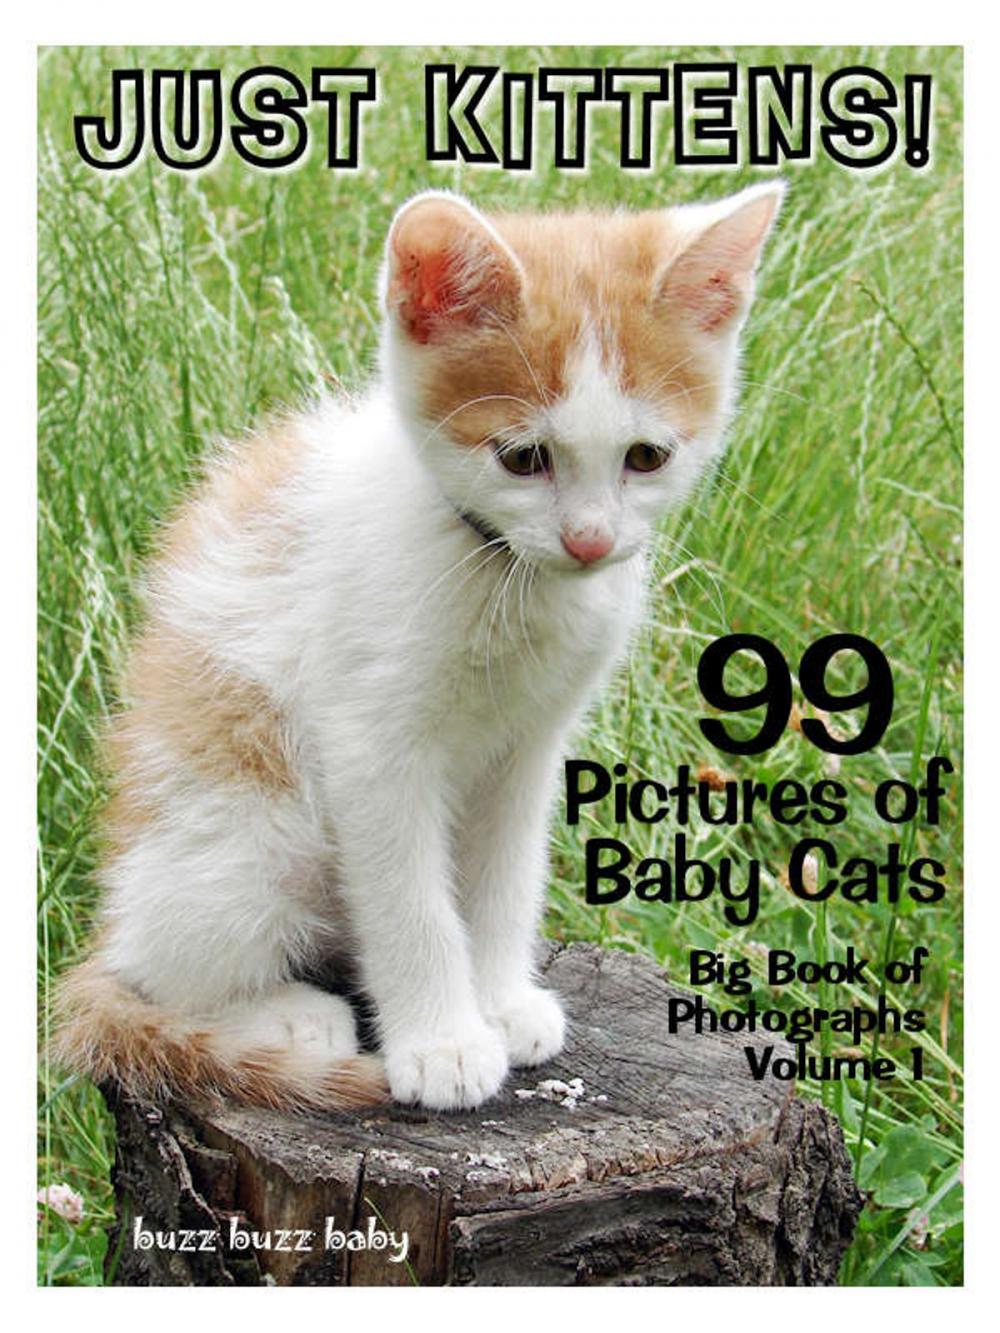 Big bigCover of 99 Pictures: Just Kitten Photos! Big Book of Baby Cat Photographs Vol. 1